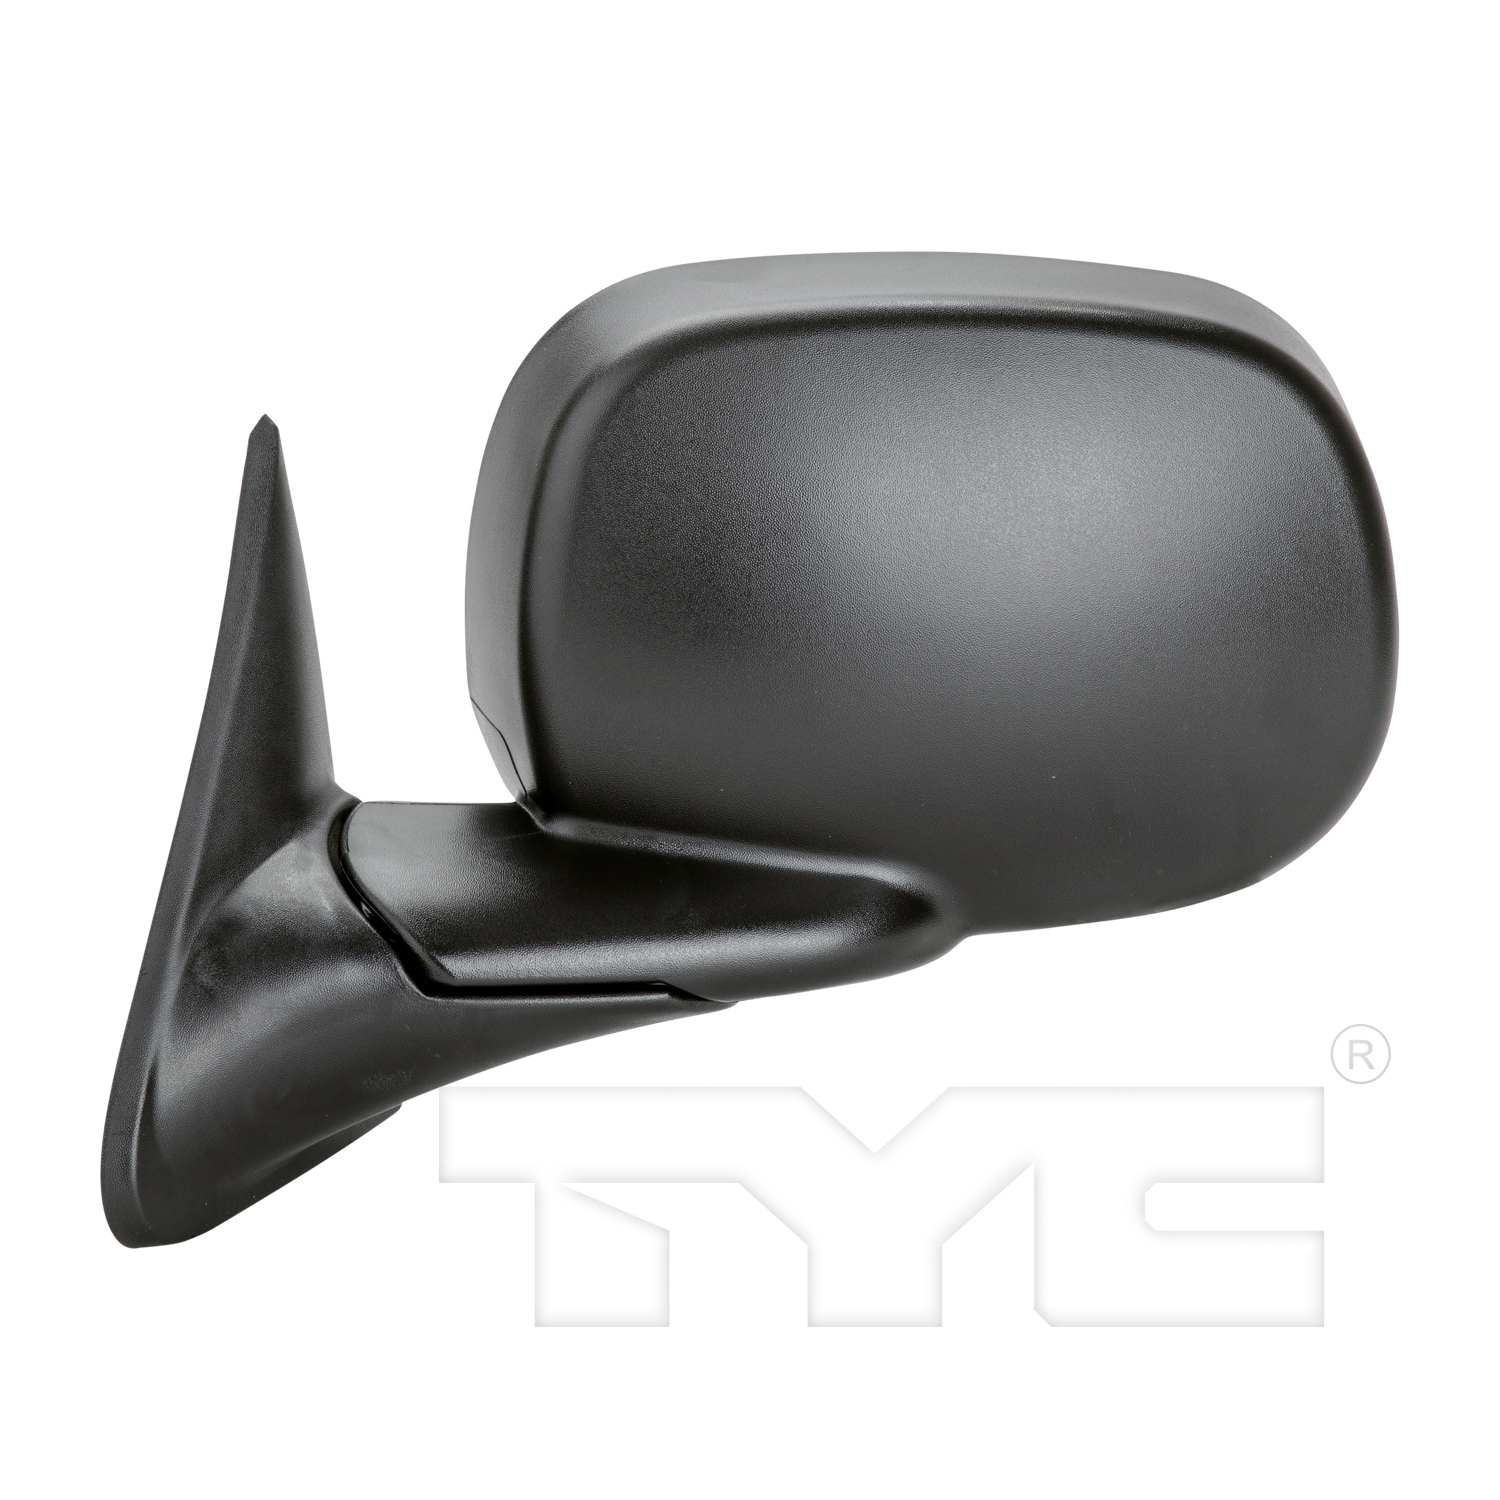 Aftermarket MIRRORS for DODGE - RAM 3500, RAM 3500,98-00,LT Mirror outside rear view